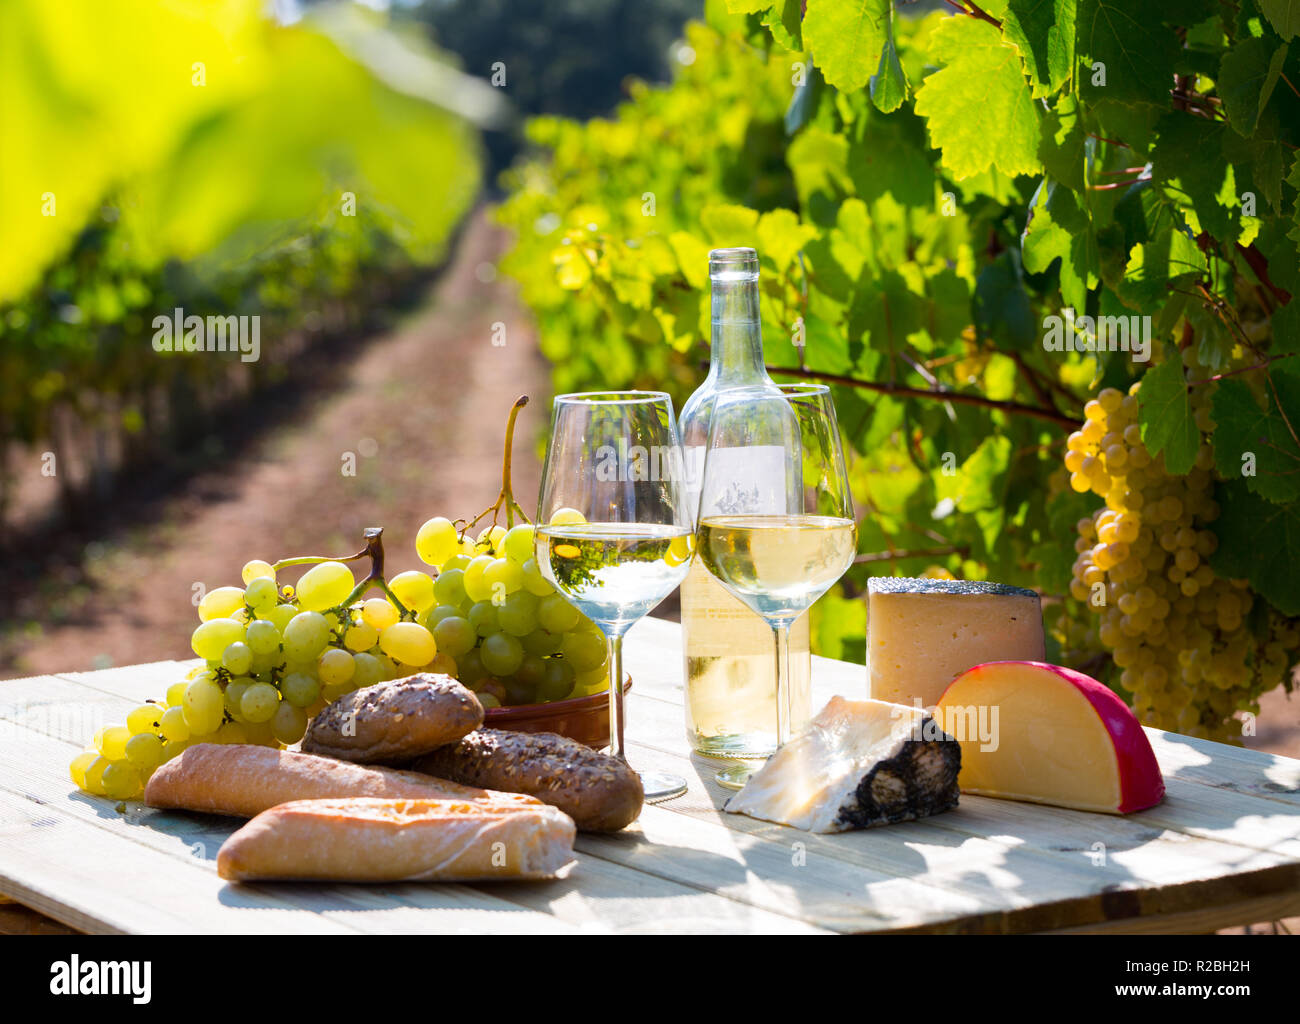 https://c8.alamy.com/comp/R2BH2H/glasses-and-bottles-of-white-wine-cheese-bread-and-grapes-against-sunny-vineyard-R2BH2H.jpg